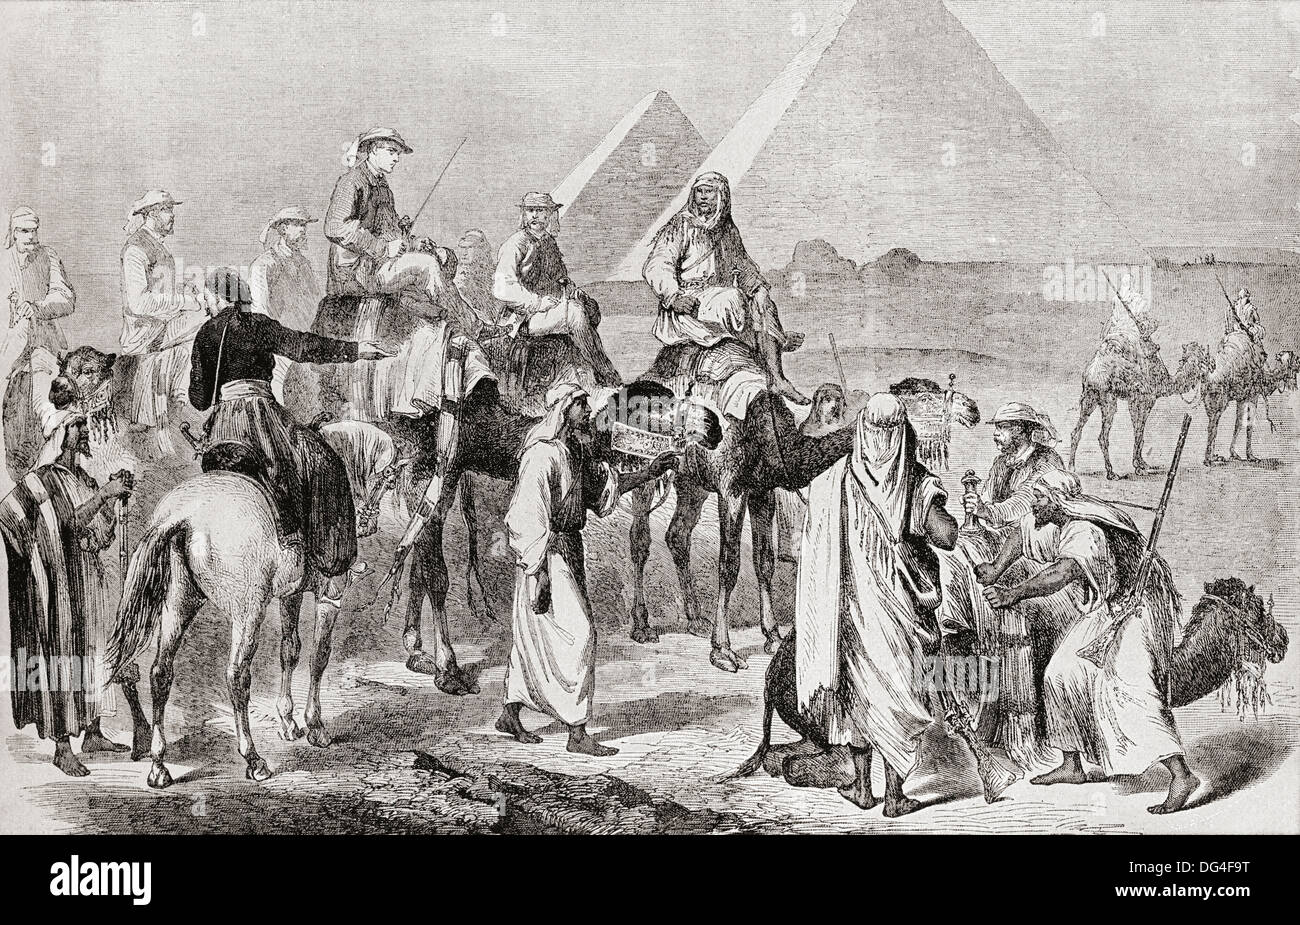 Victorian tourists at the pyramids of Giza, Egypt in the nineteenth ...